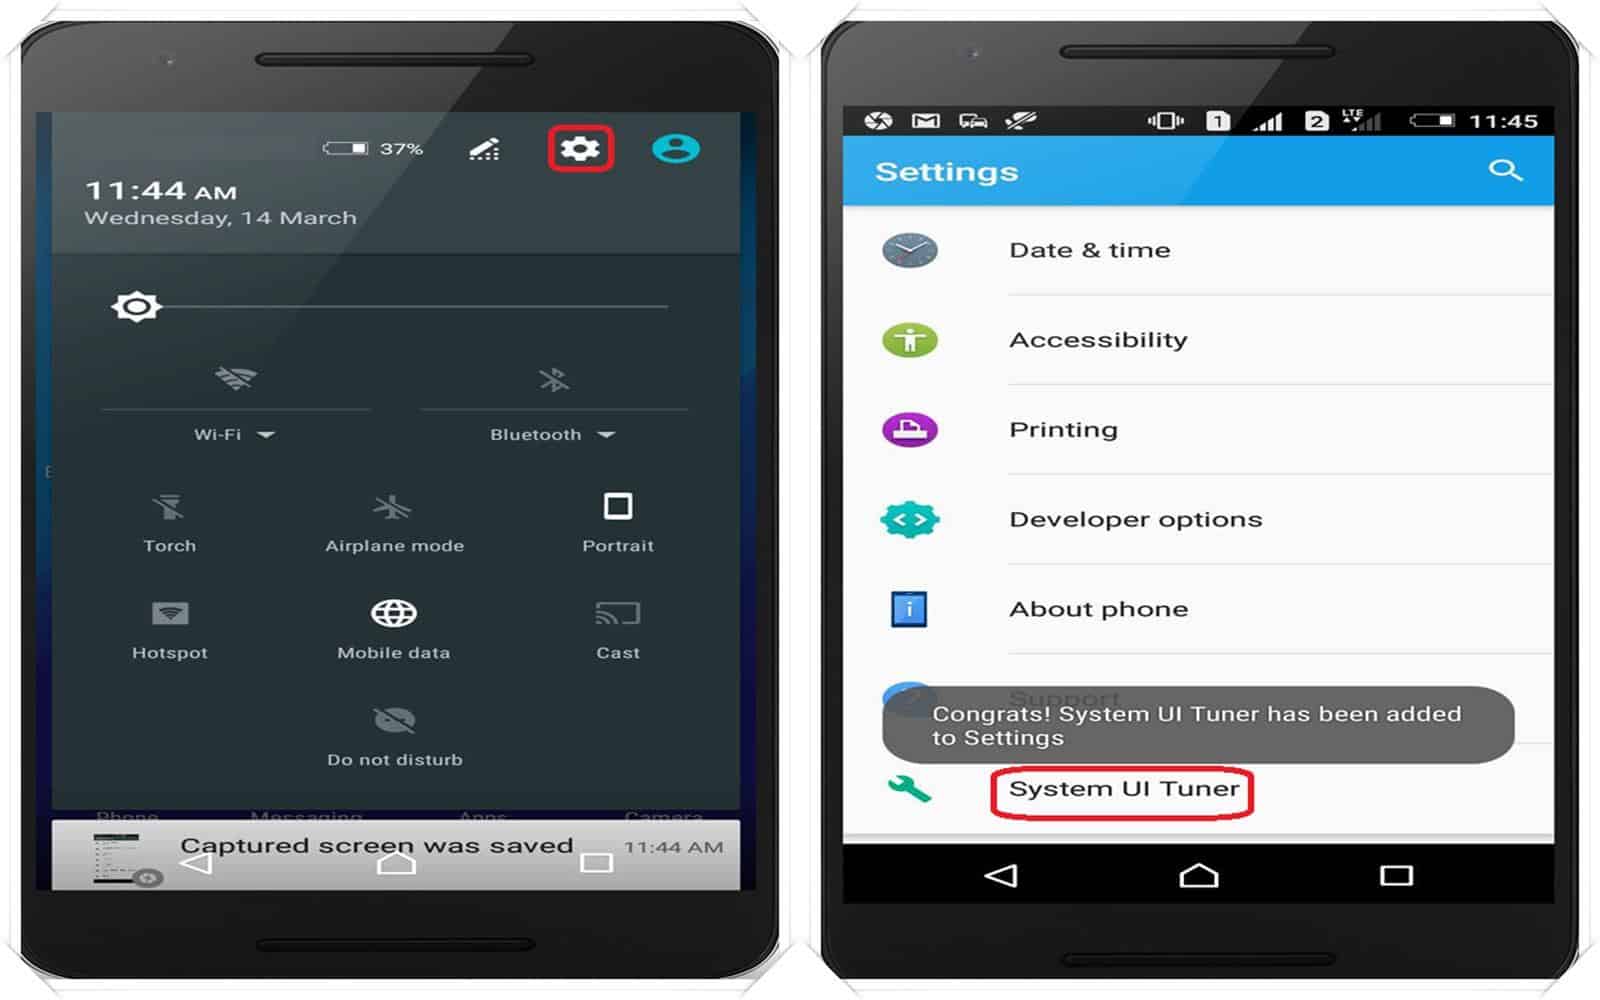 secret features of android operating system system UI tuner